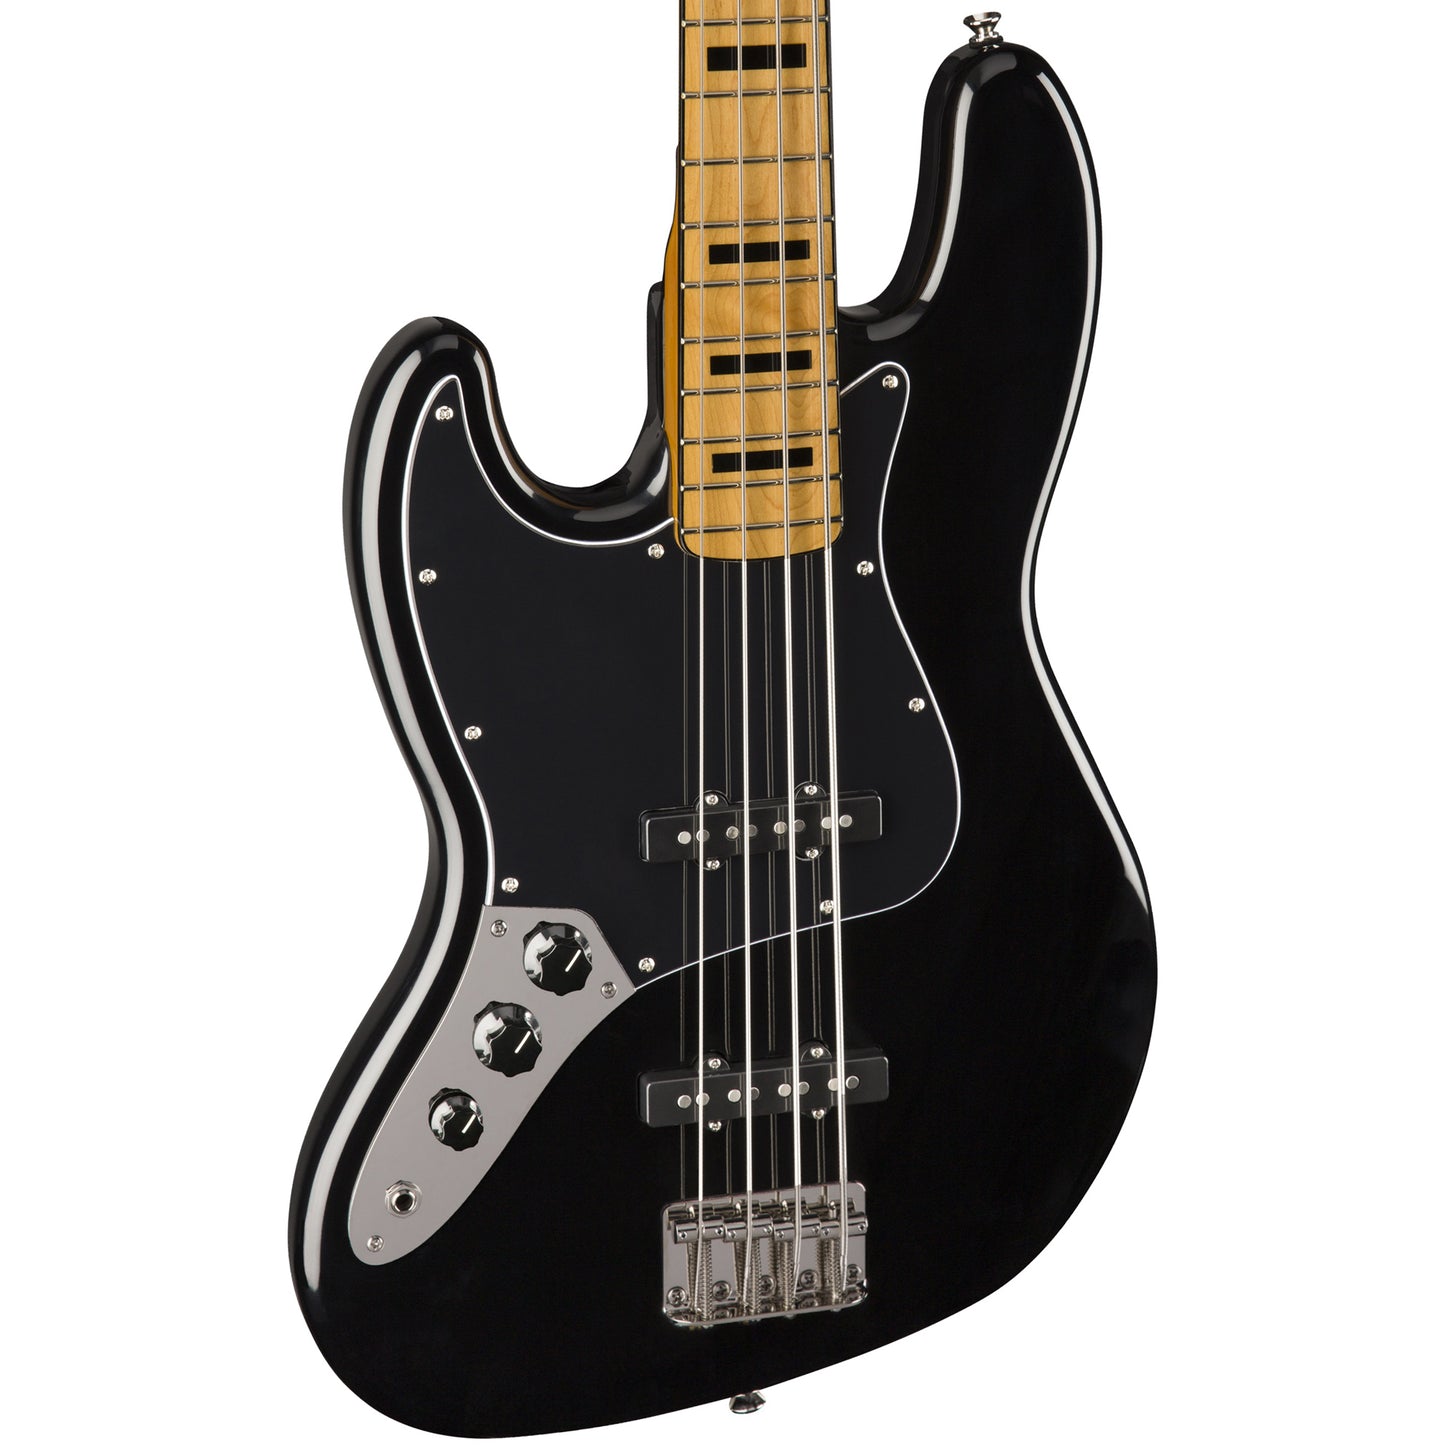 Squier Classic Vibe '70s Jazz Bass Guitar - Maple Fingerboard, Black